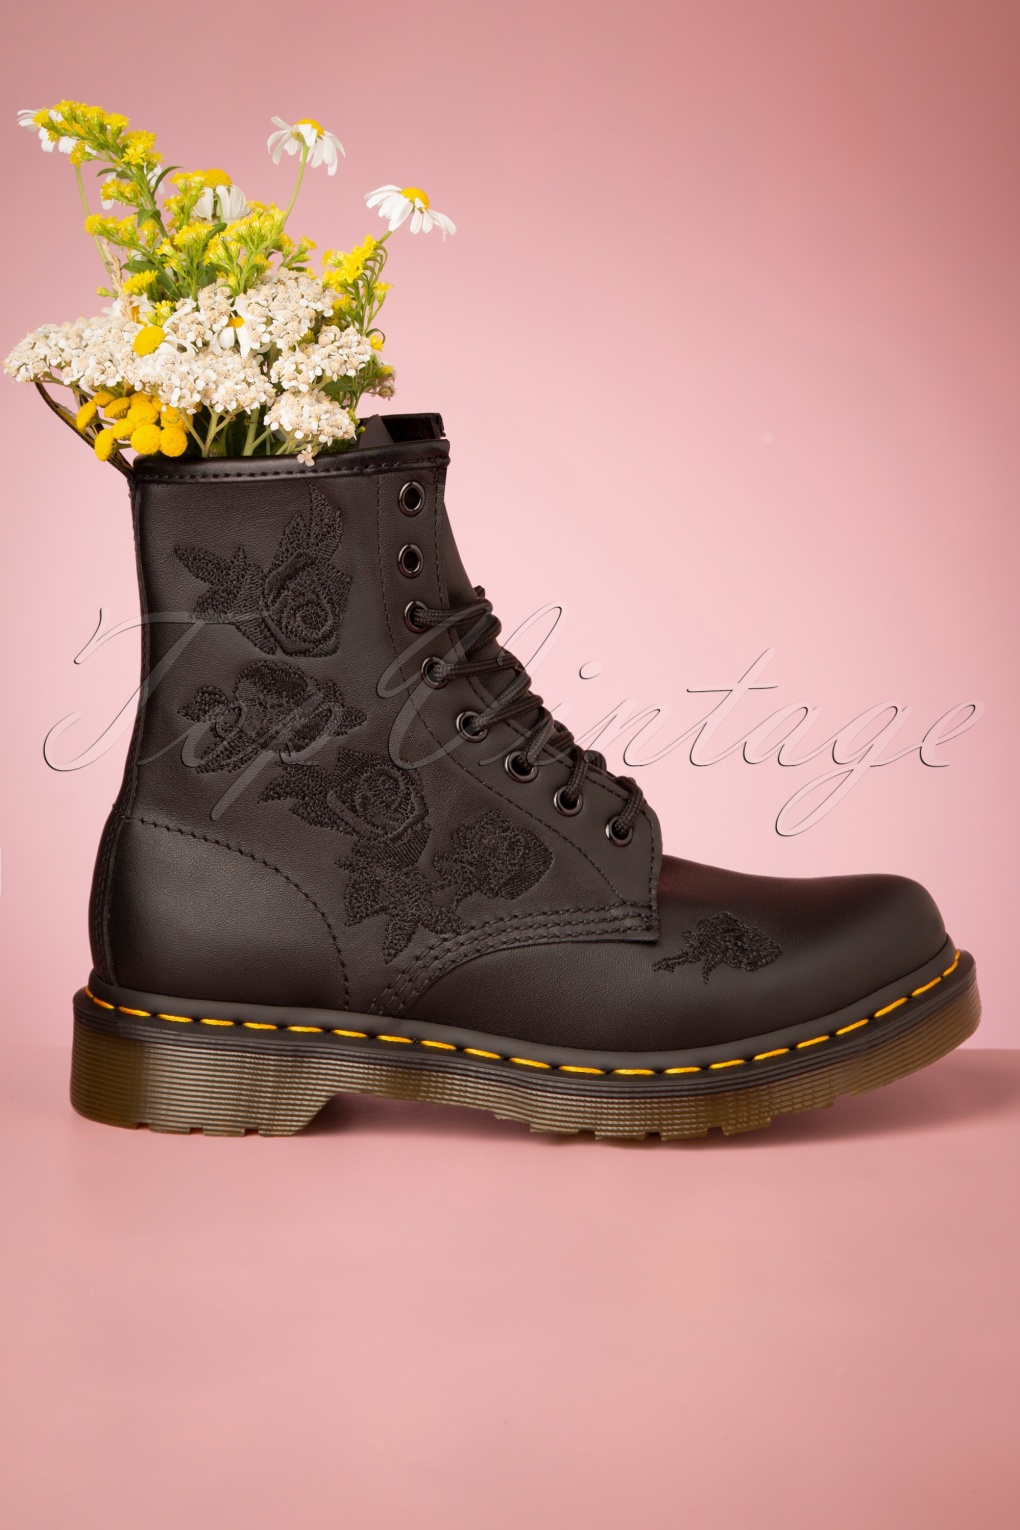 boots with flowers on them